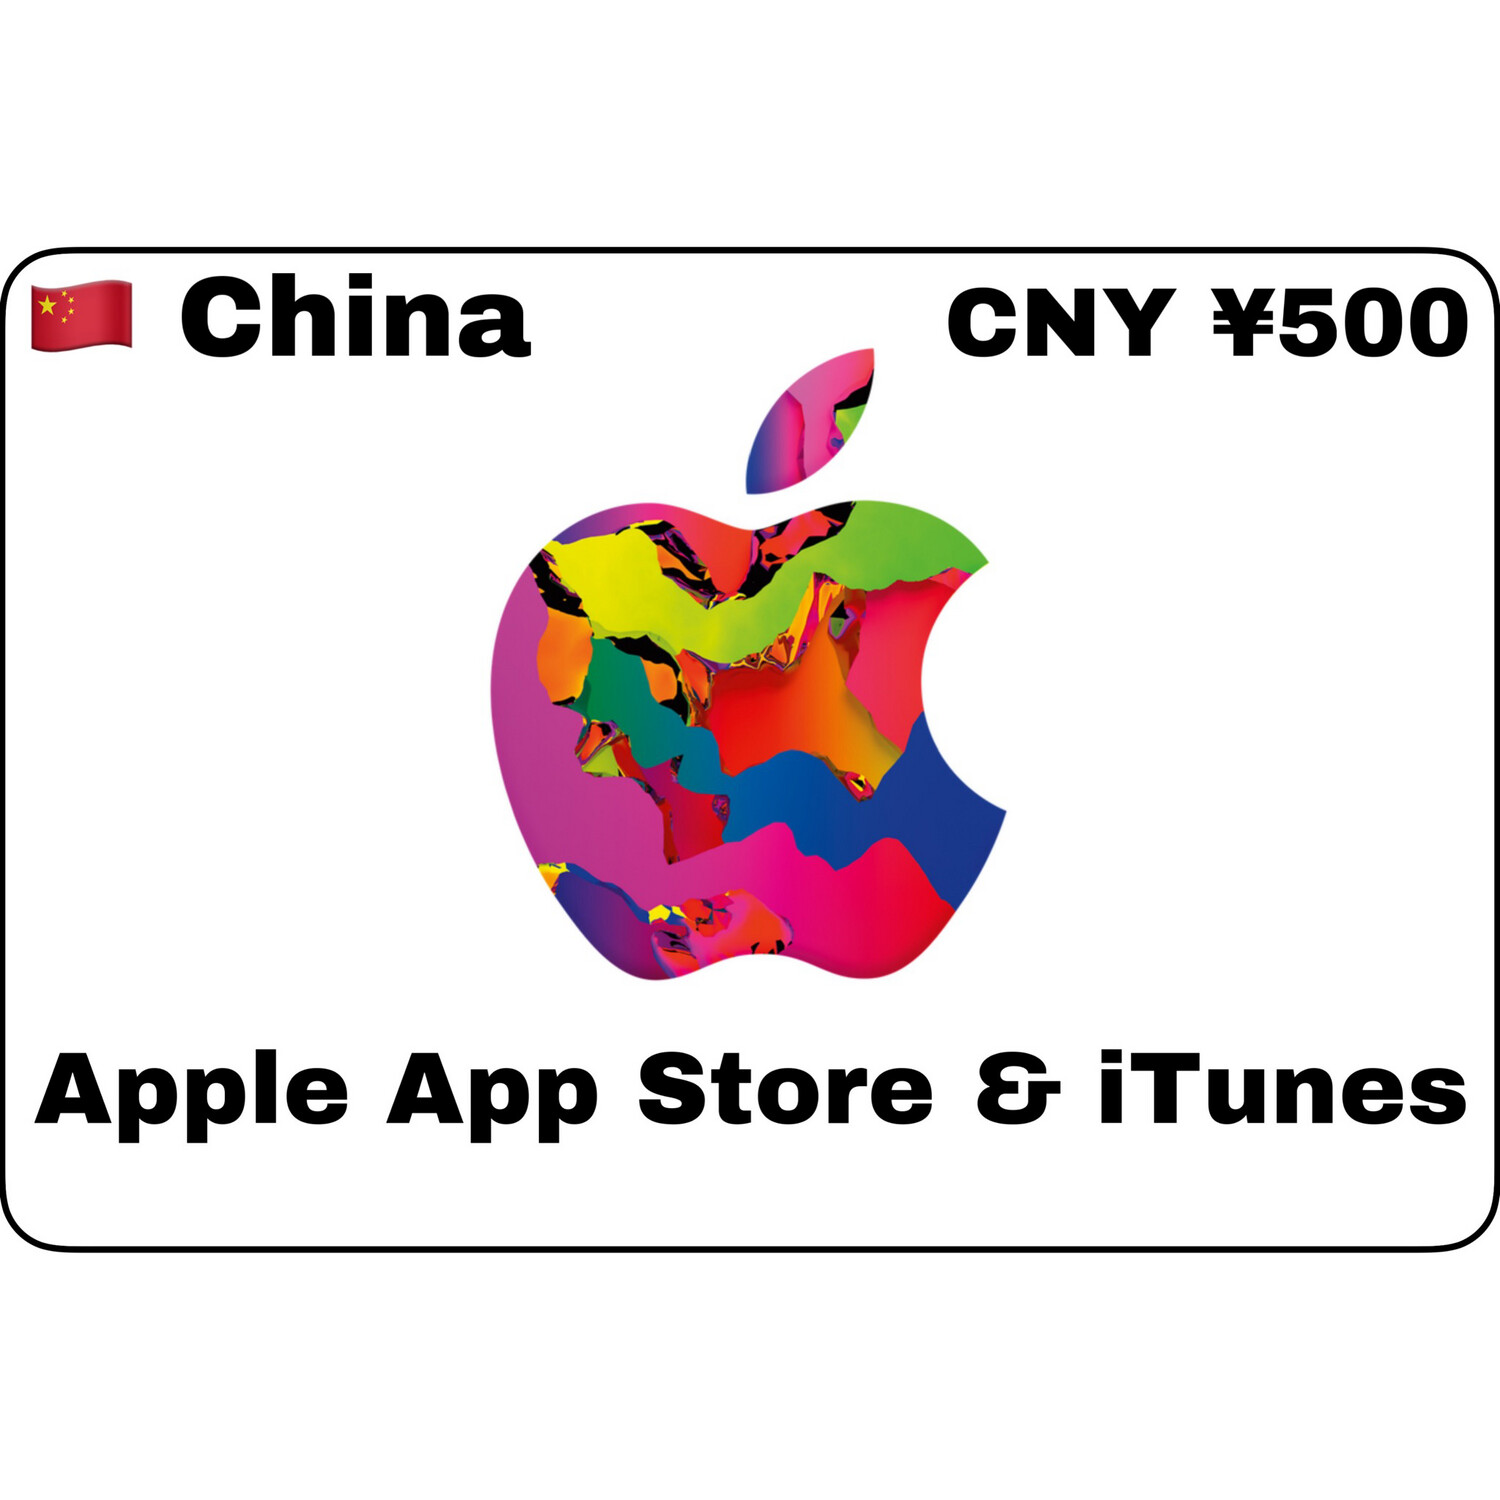 Apple iTunes Gift Card China CNY ¥500